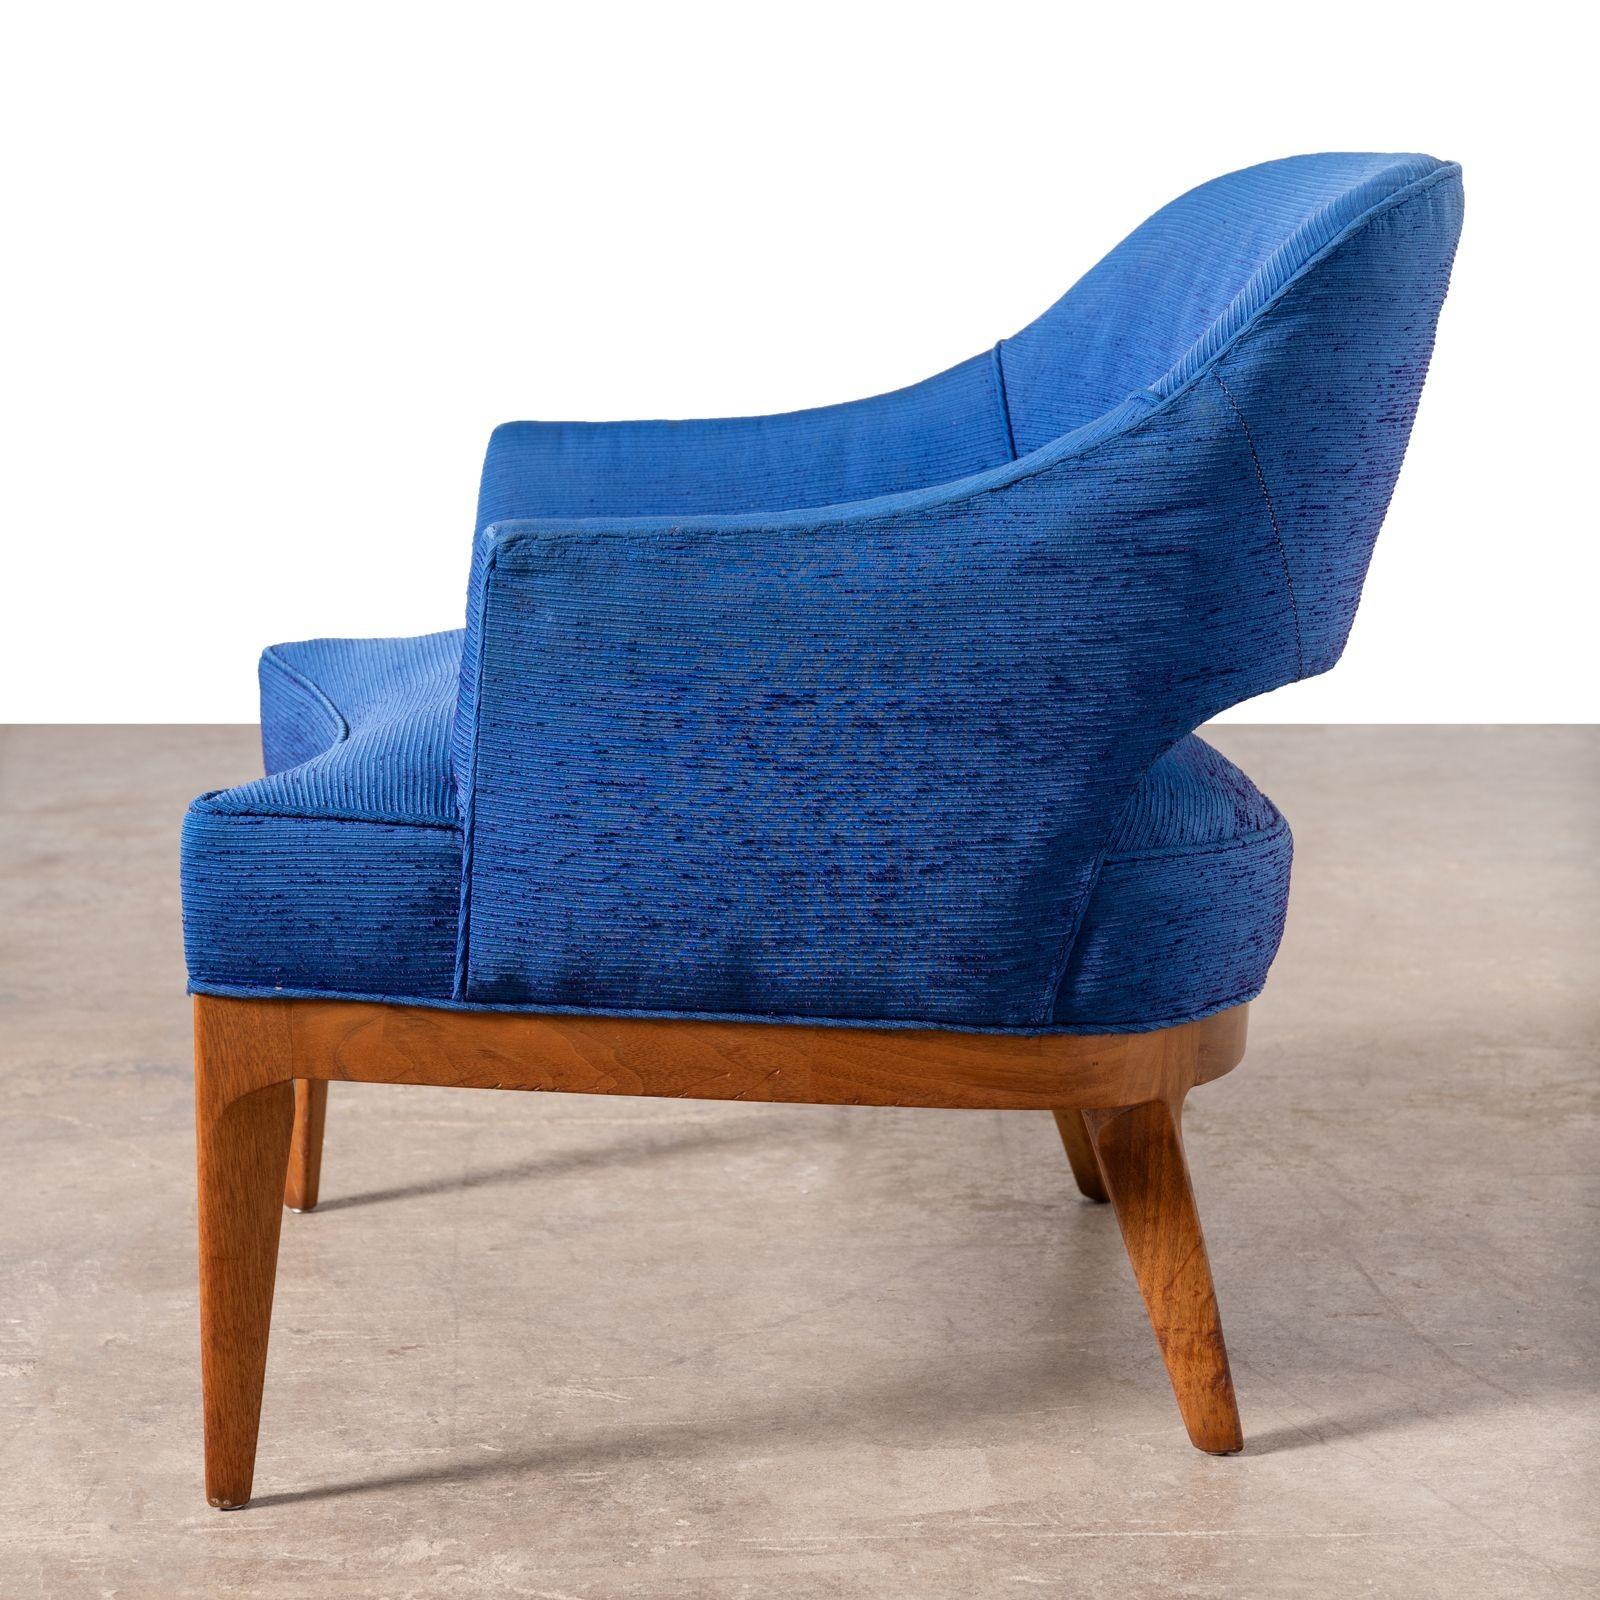 Erwin Lambeth Open Back Lounge Chairs in Raw Blue Silk with Walnut Frames 1960s For Sale 1